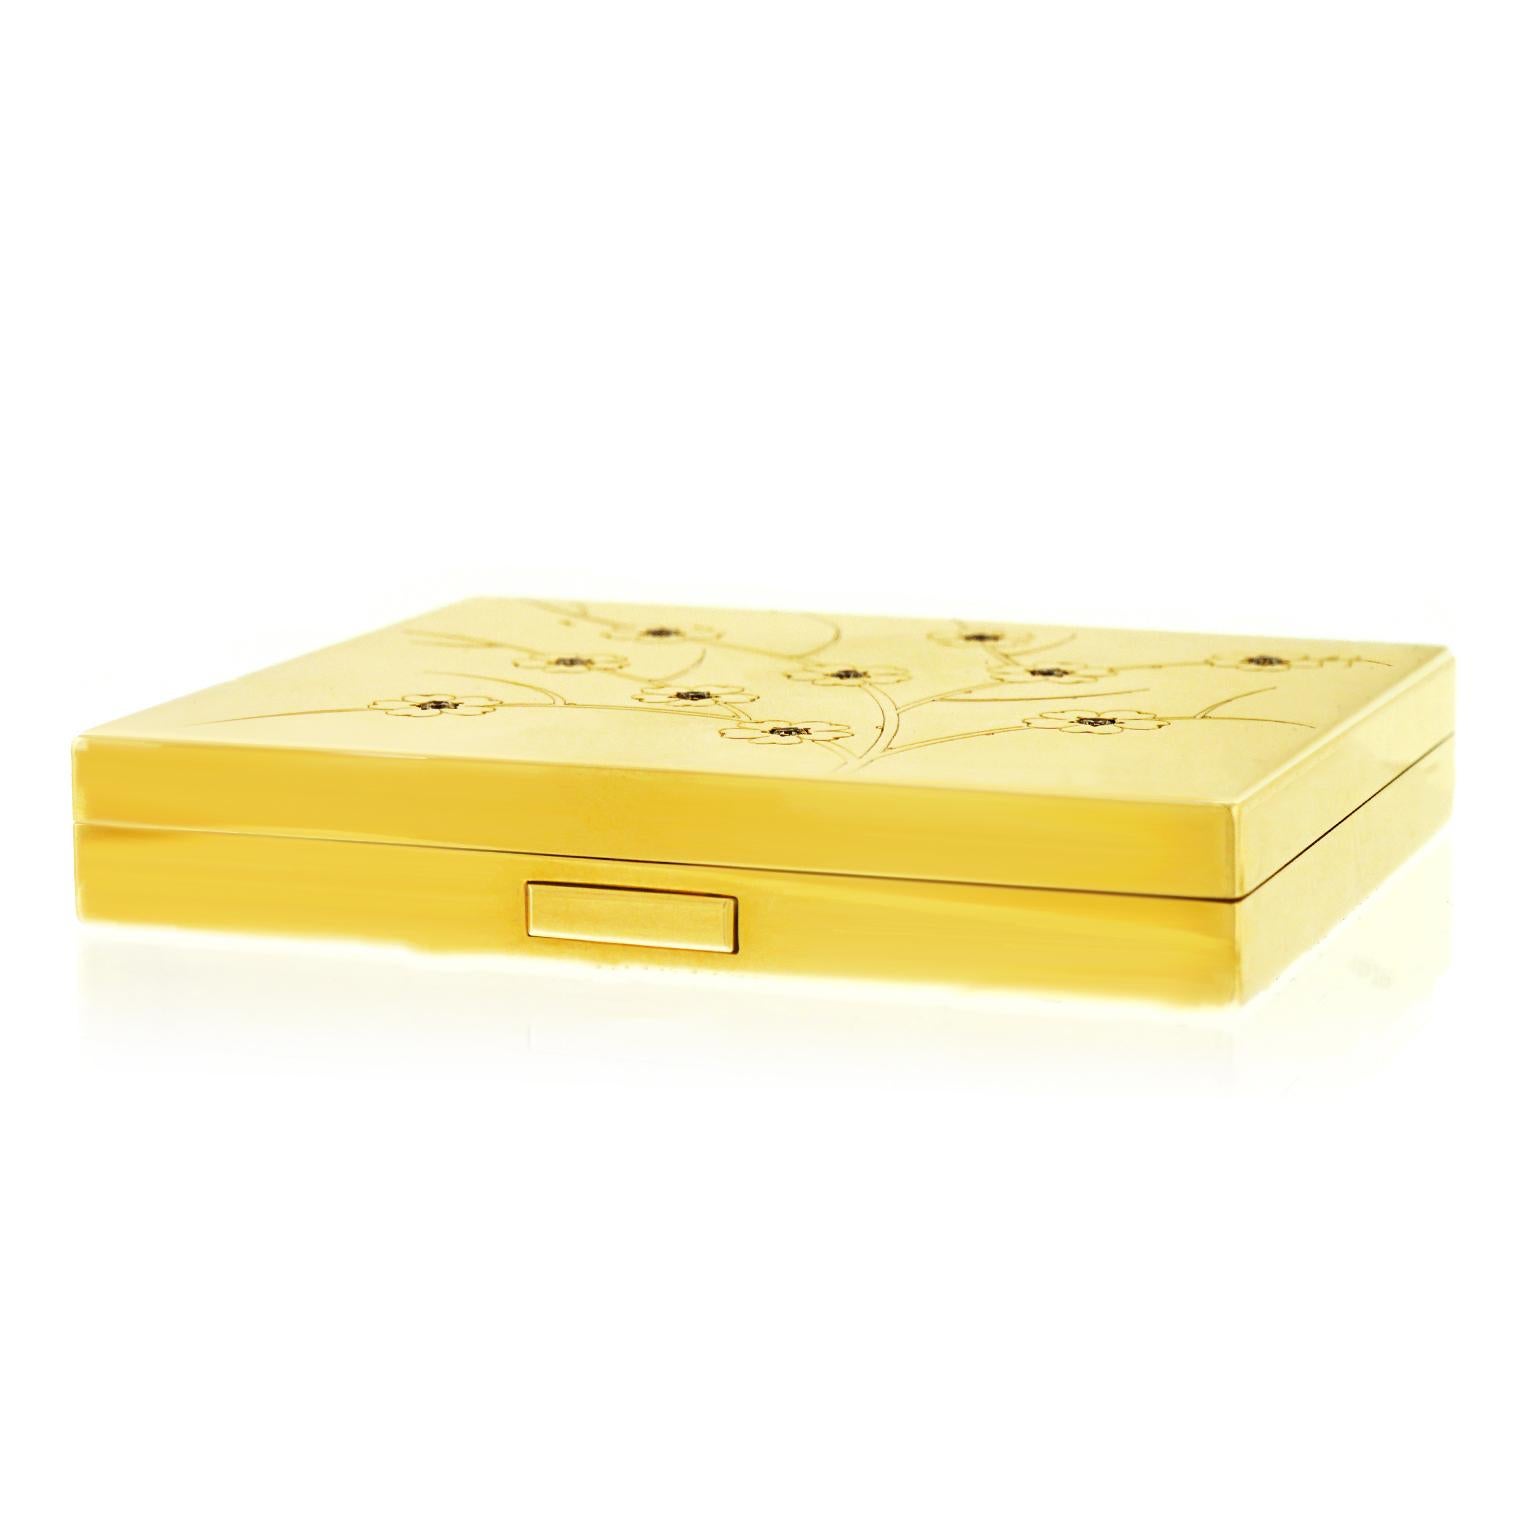 Tiffany & Co. Japanese Taste Gold Compact Case 3